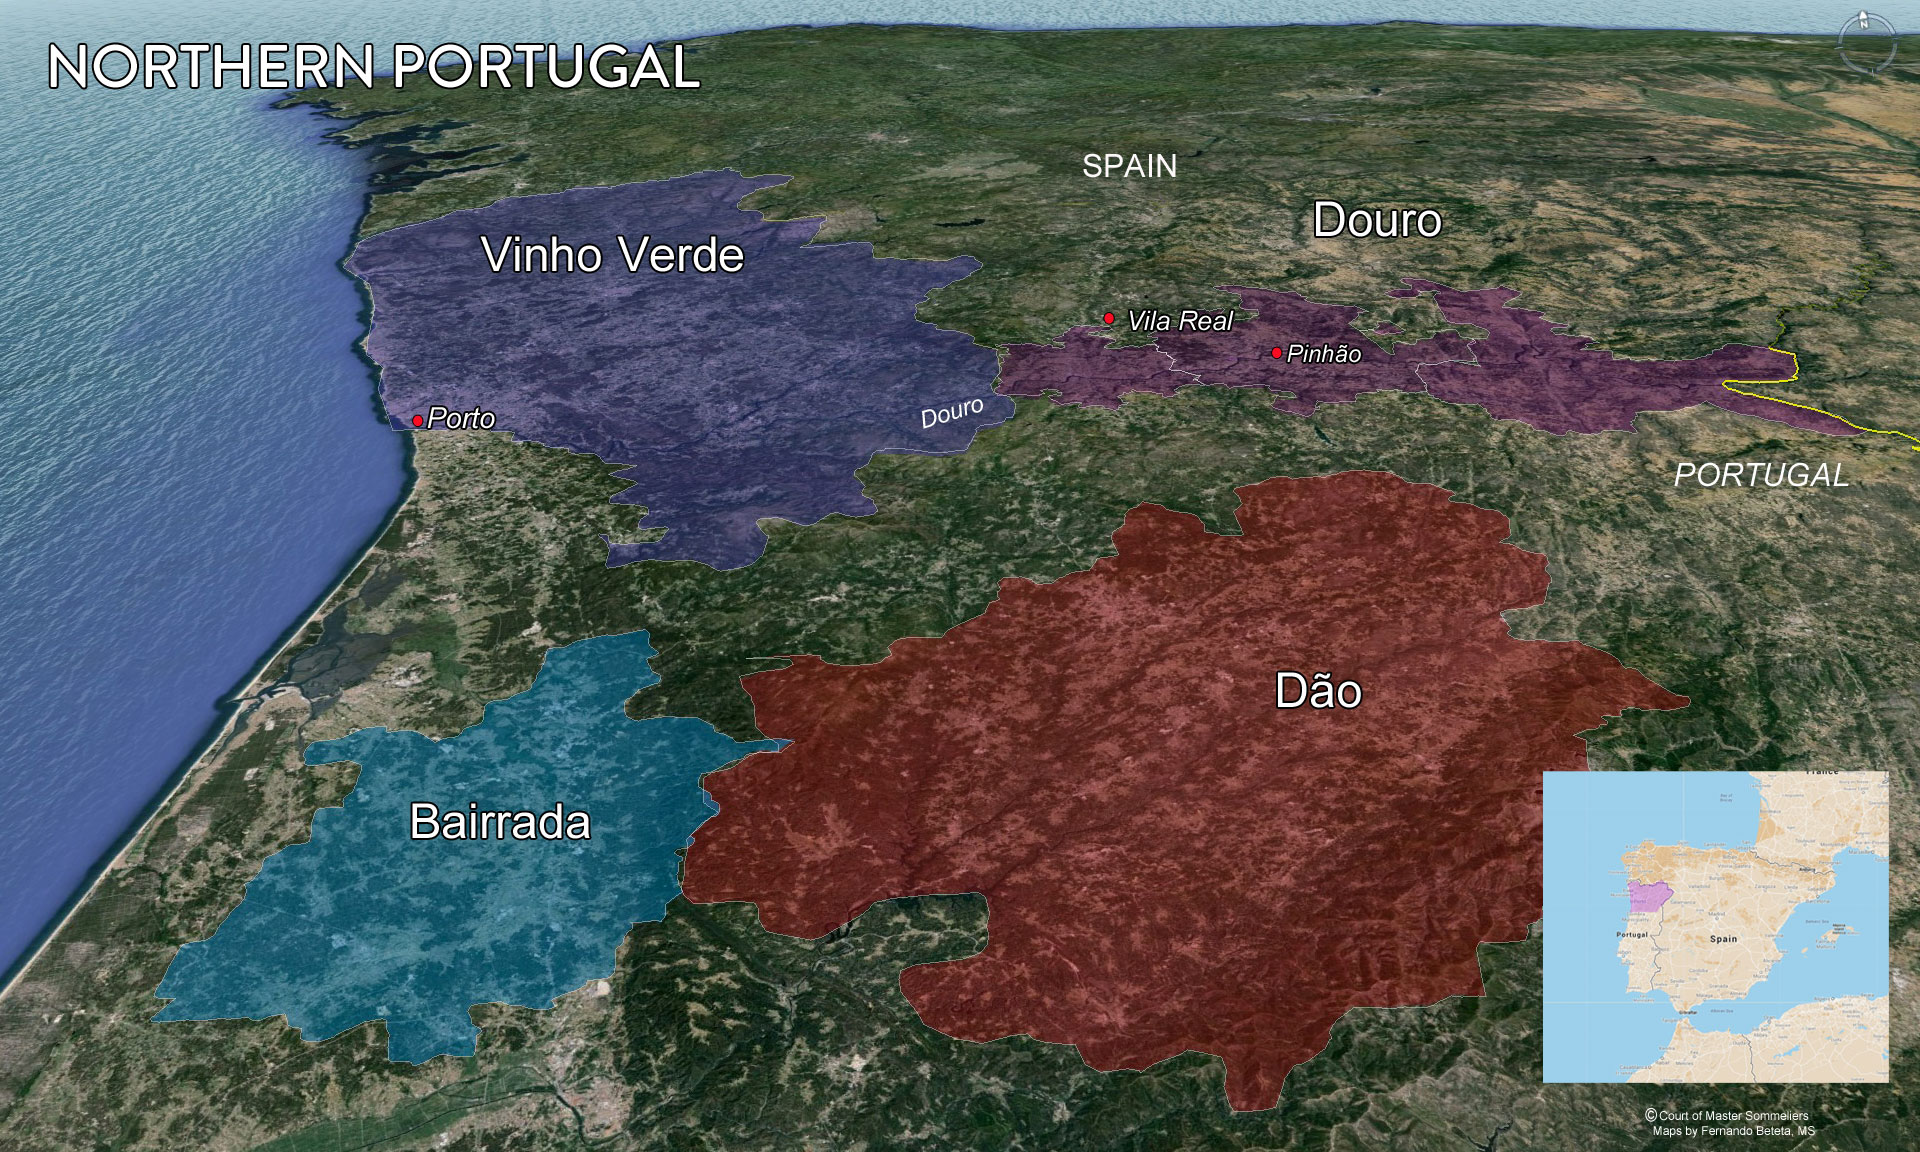 Northern Portugal wine map